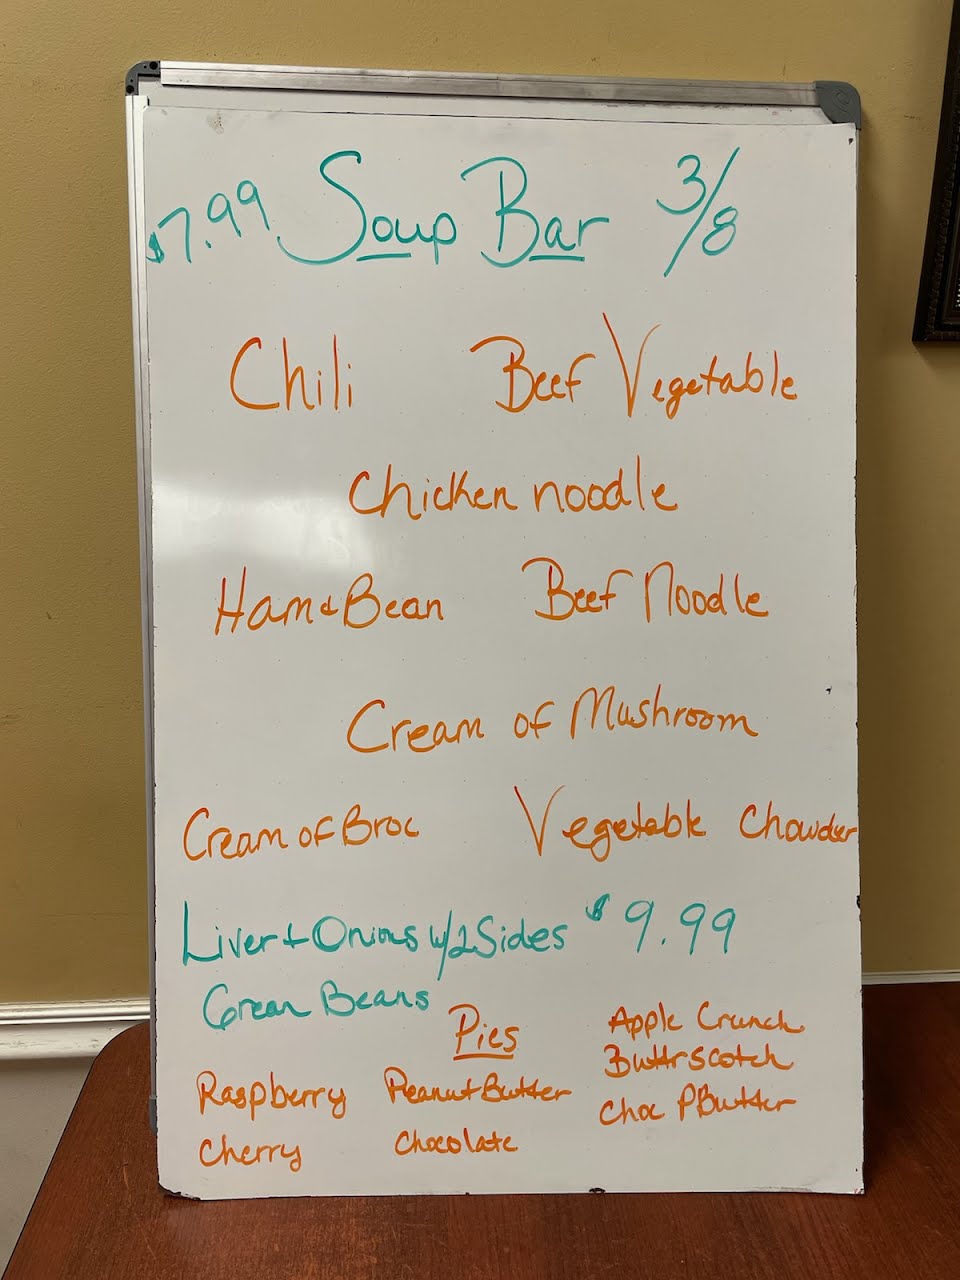 Soup Bar Items for March 8, 2022